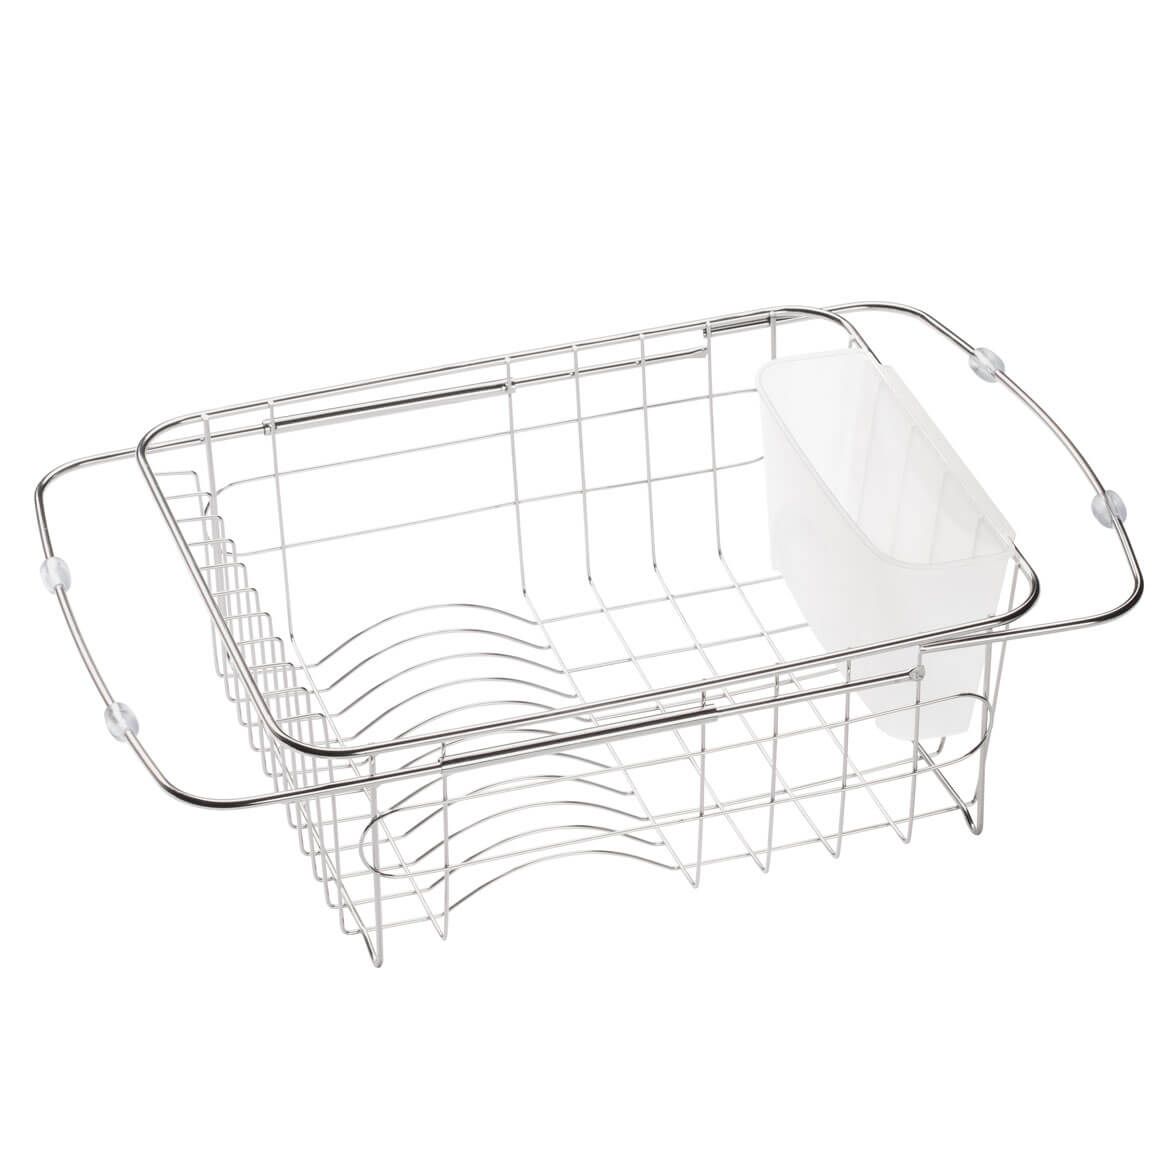 Over-the-Sink Dish Rack Chef's Pride + '-' + 305089